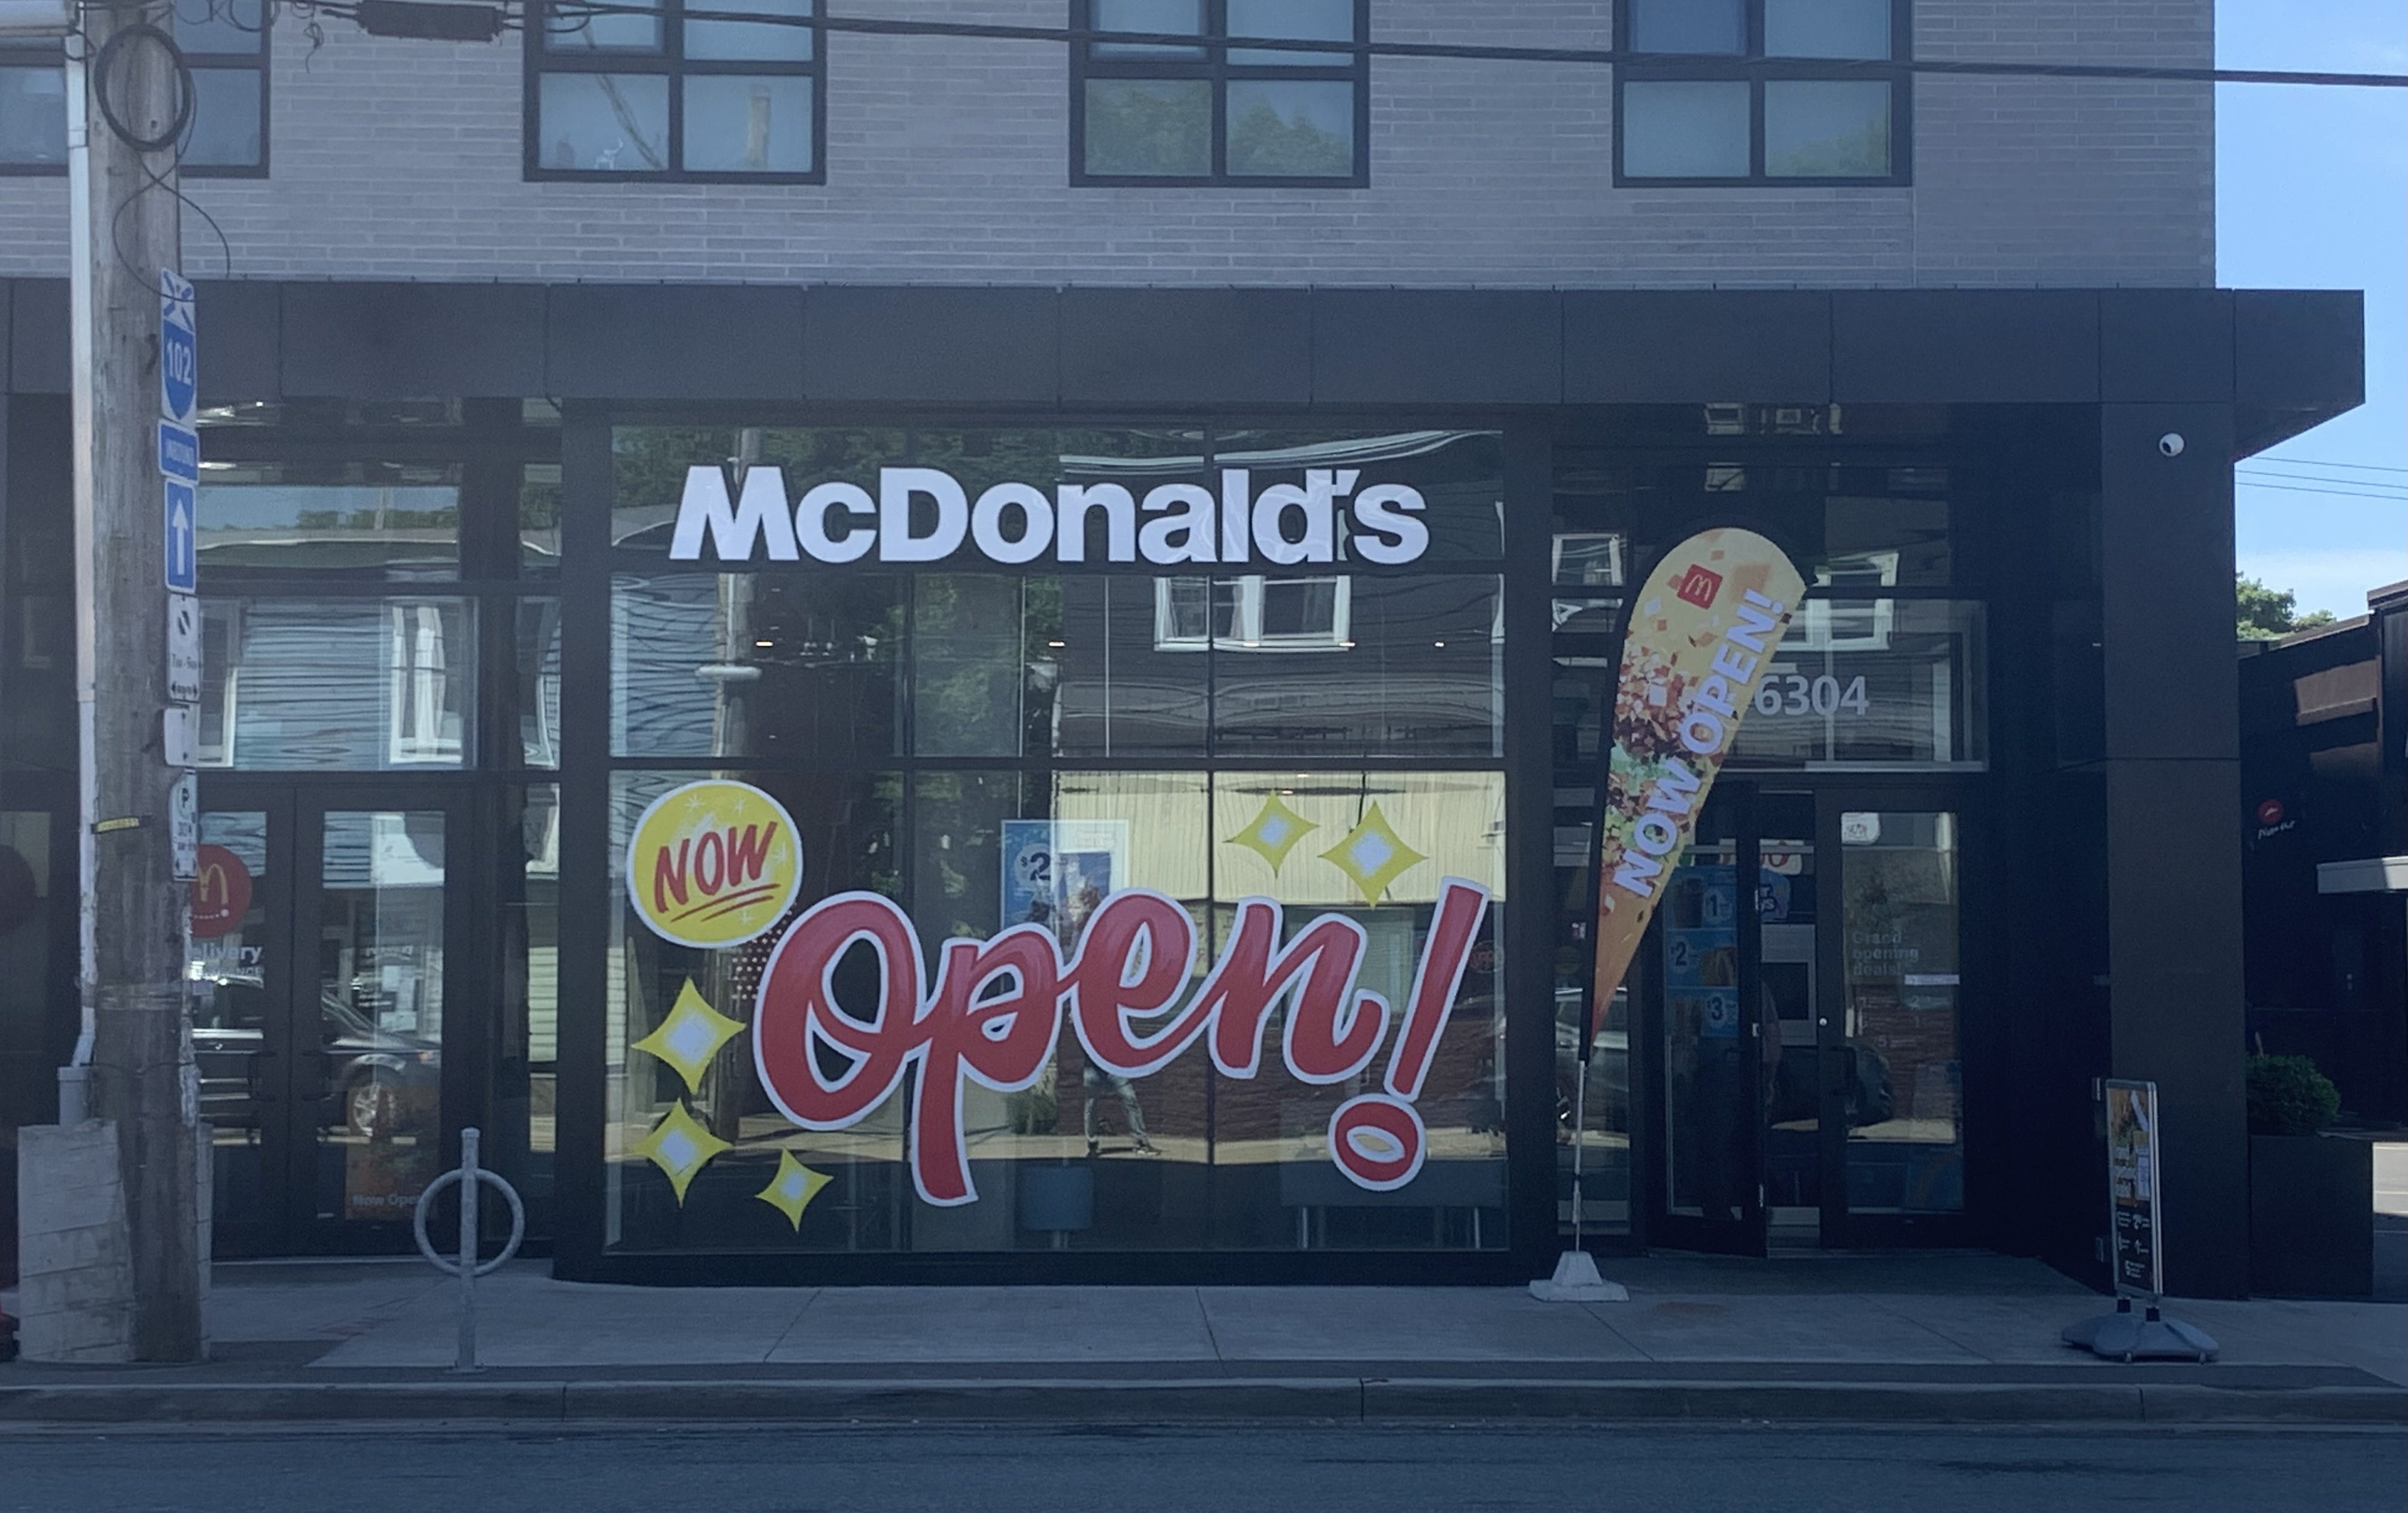 Quinpool’s iconic McDonald’s is gone. A new one has opened next door